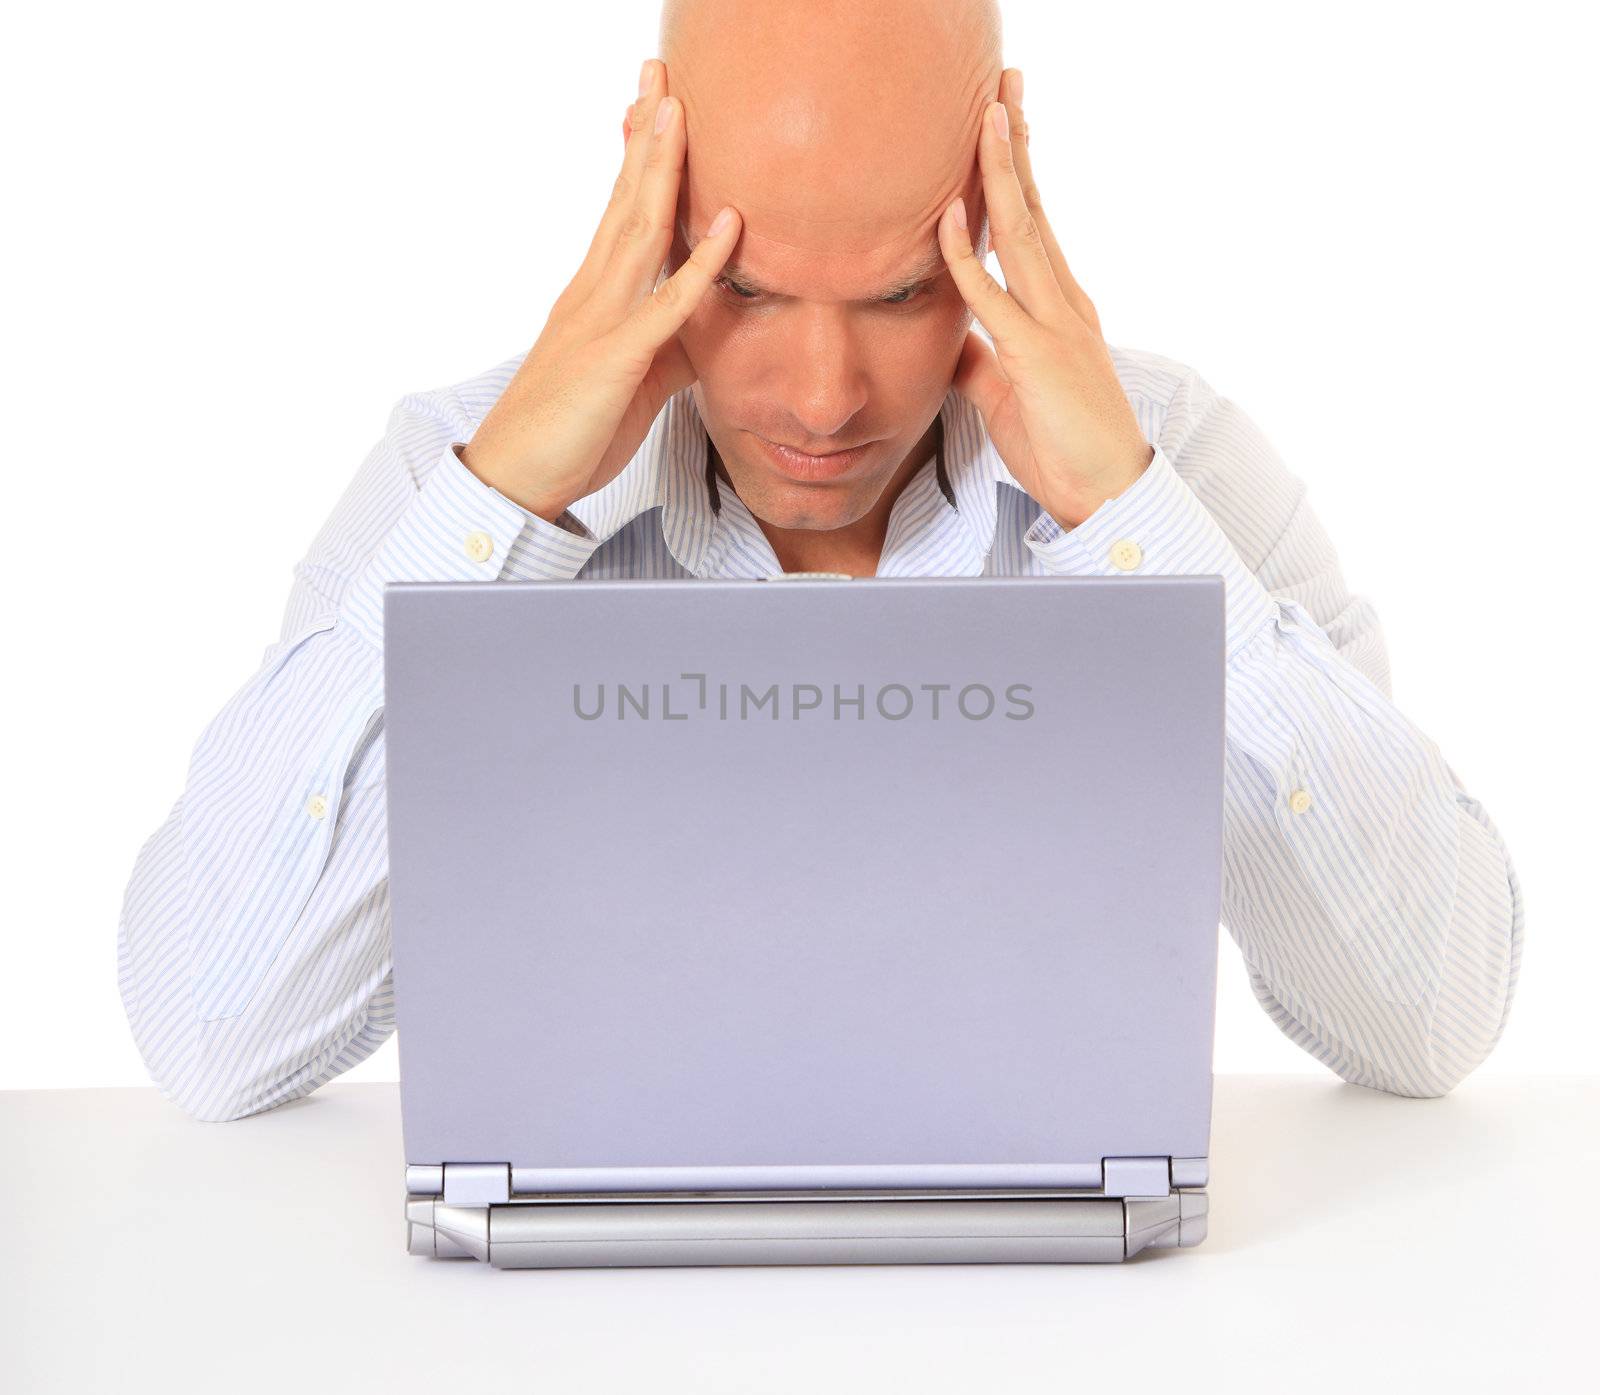 Frustrated man sitting in front of his laptop. All on white background.